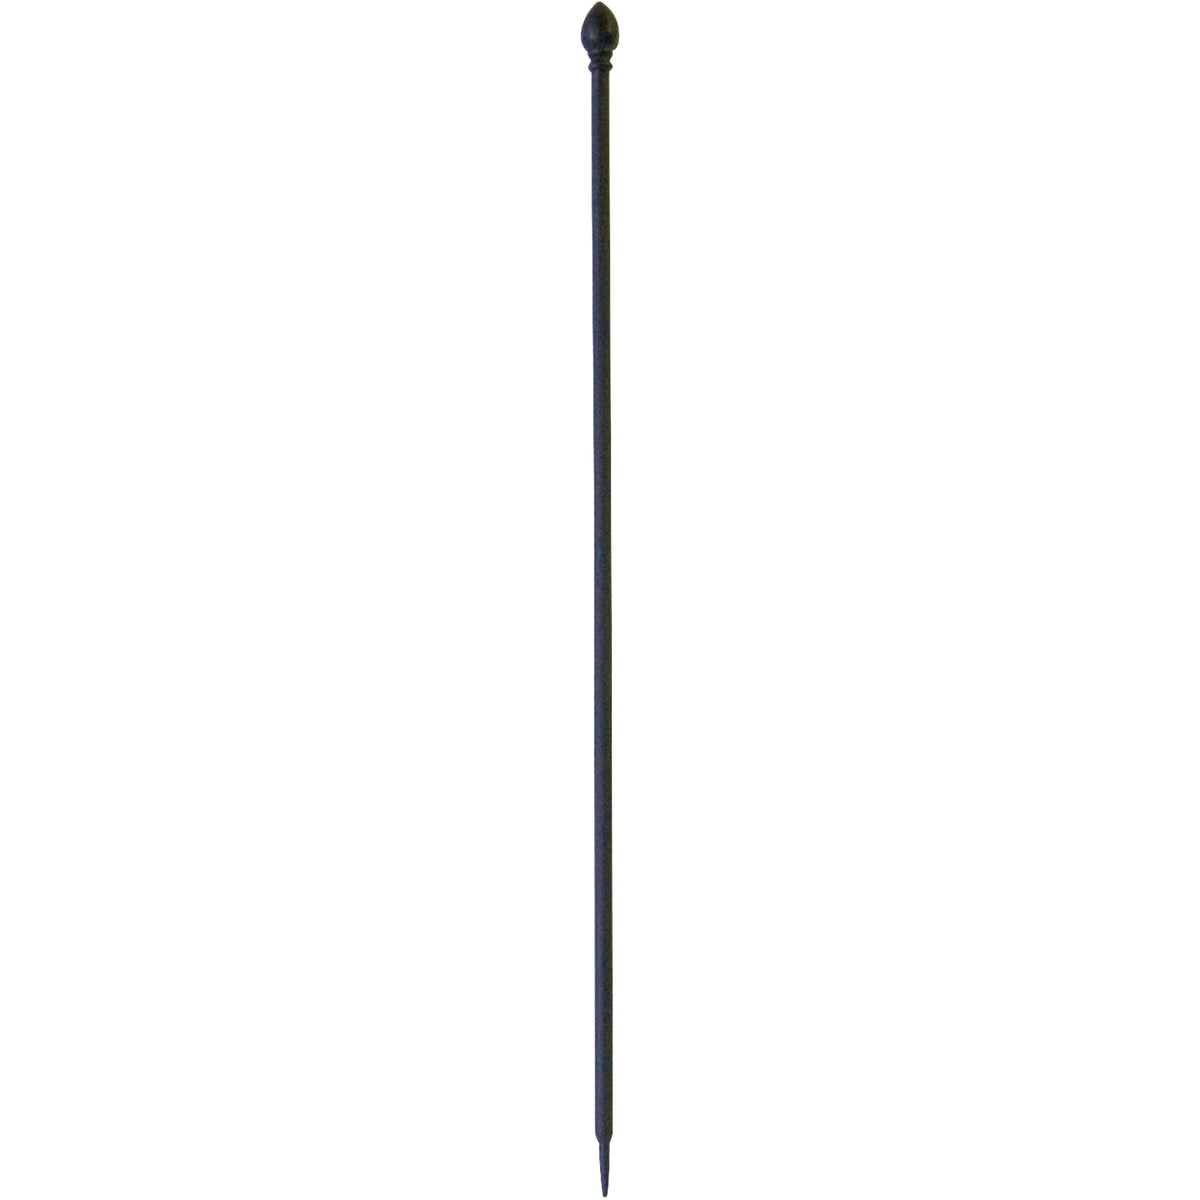 Item 702784, Metal garden fence post featuring a durable powder coat finish.